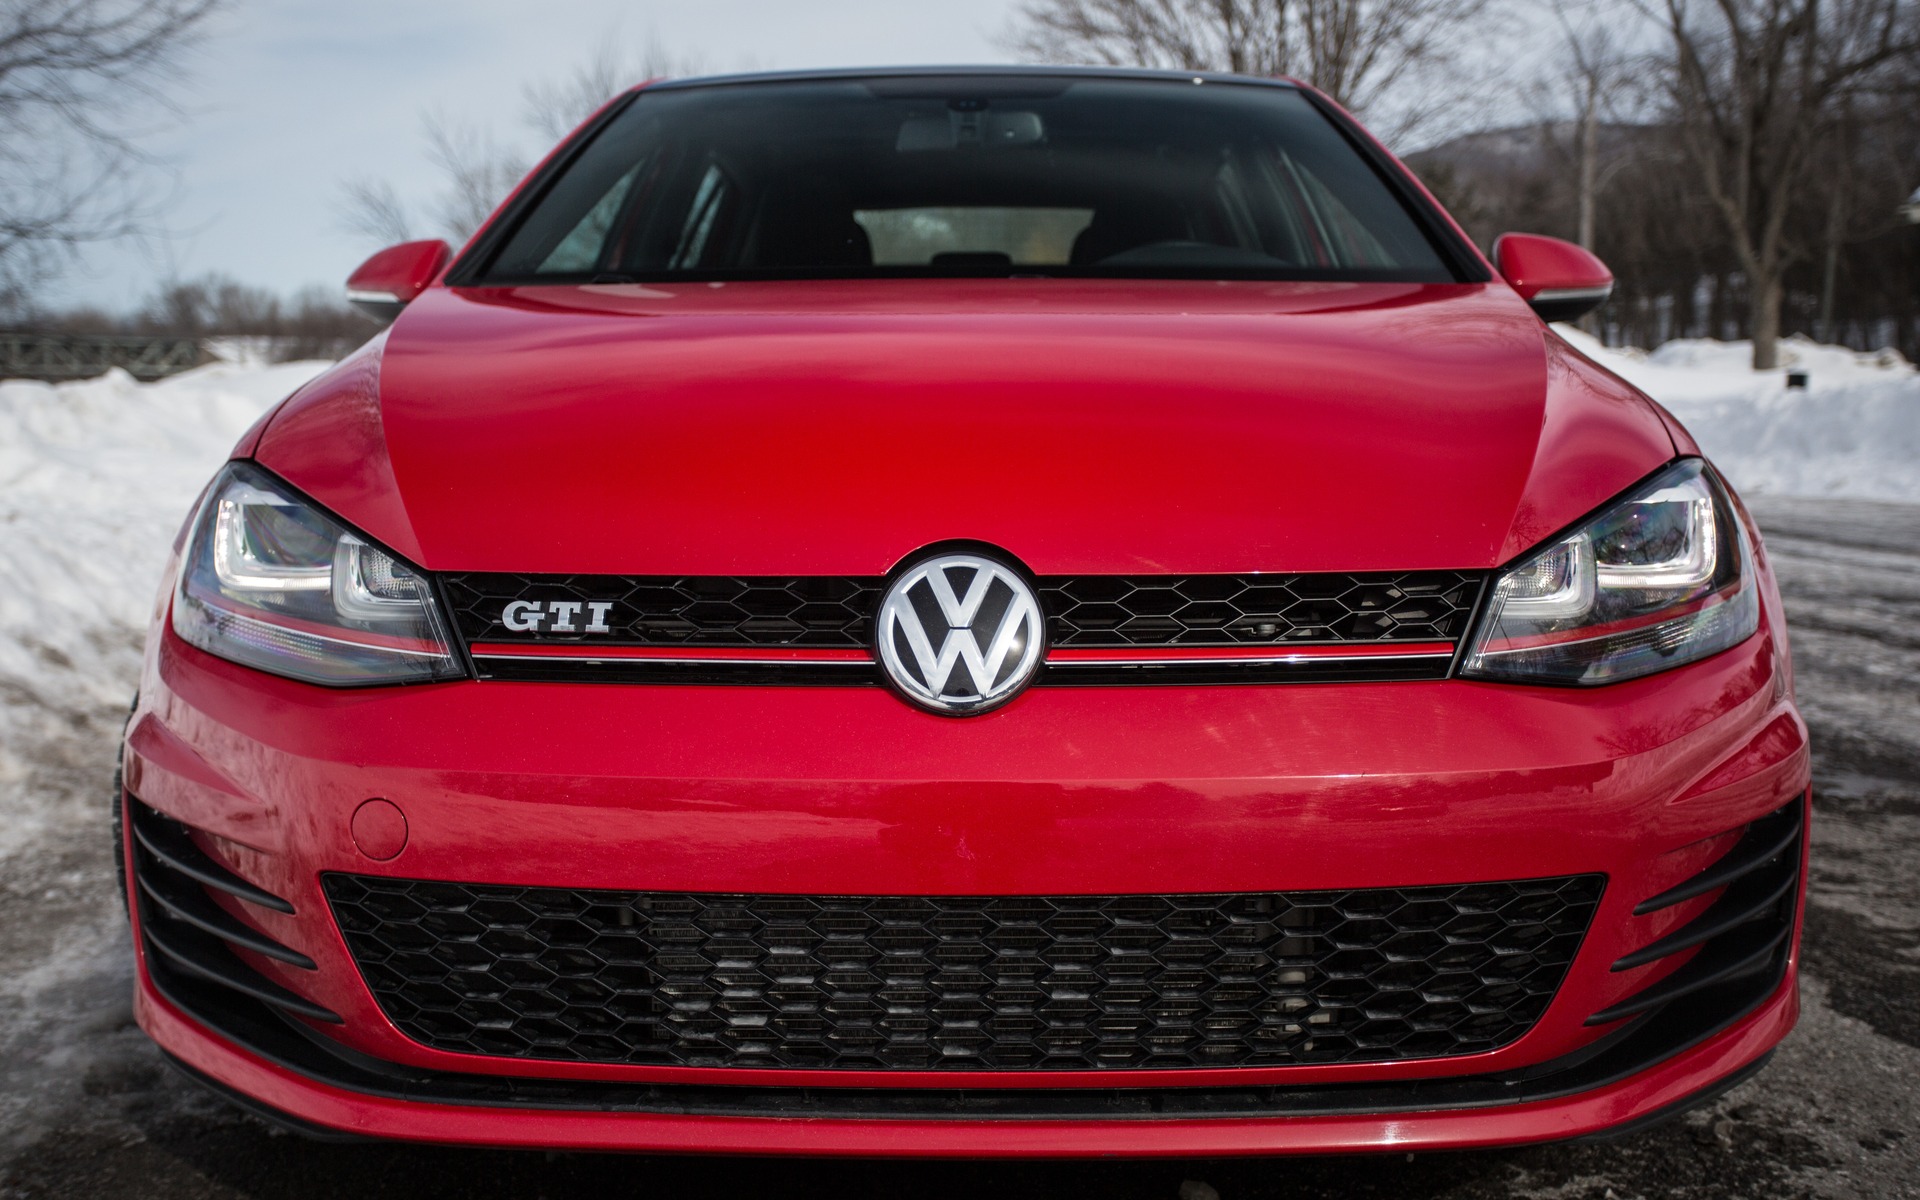 Of course, the iconic red line in the GTI’s grille is back.